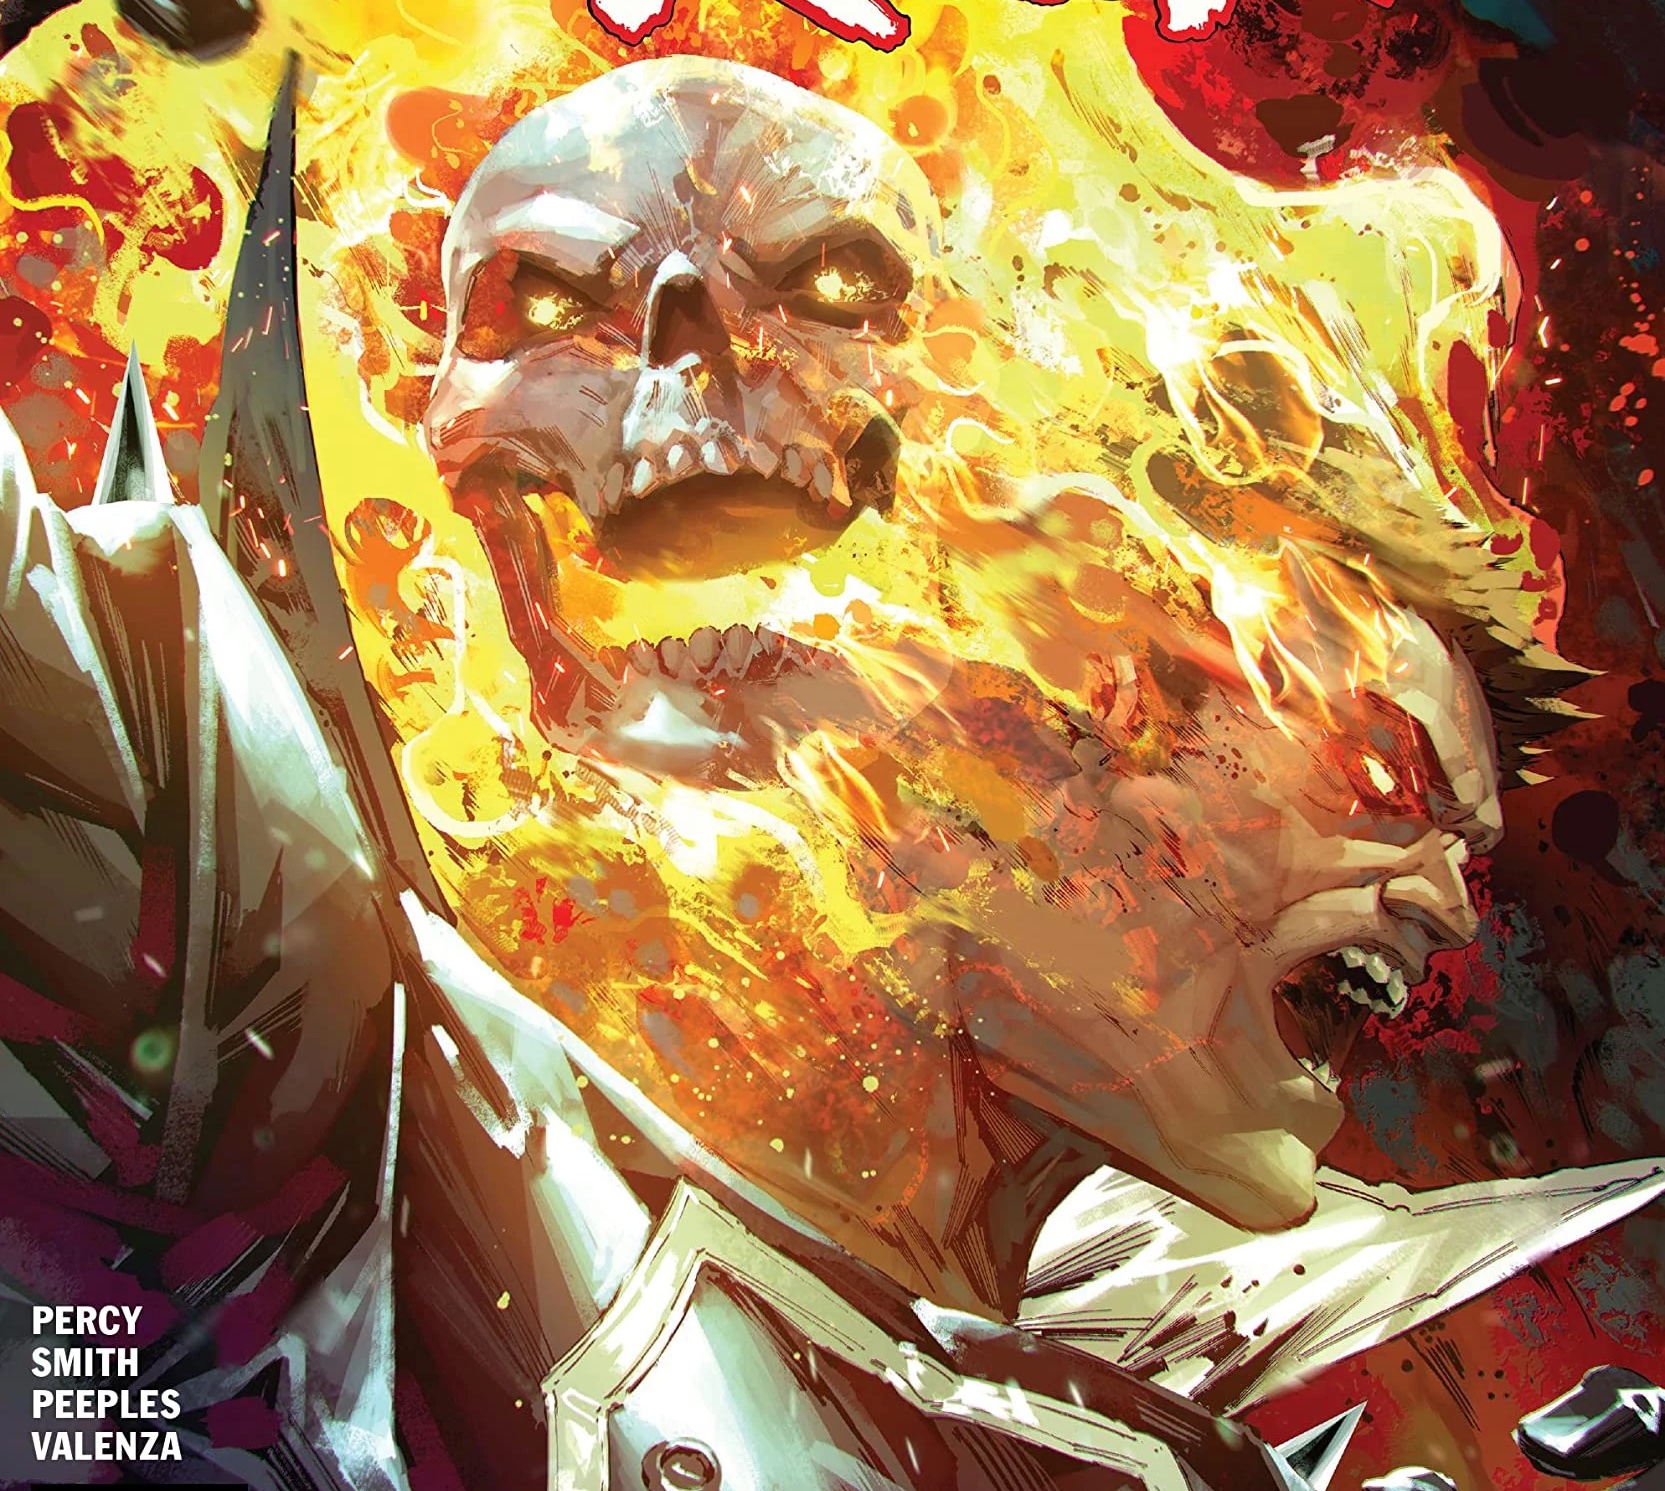 'Ghost Rider' #2 offers up some violent delights